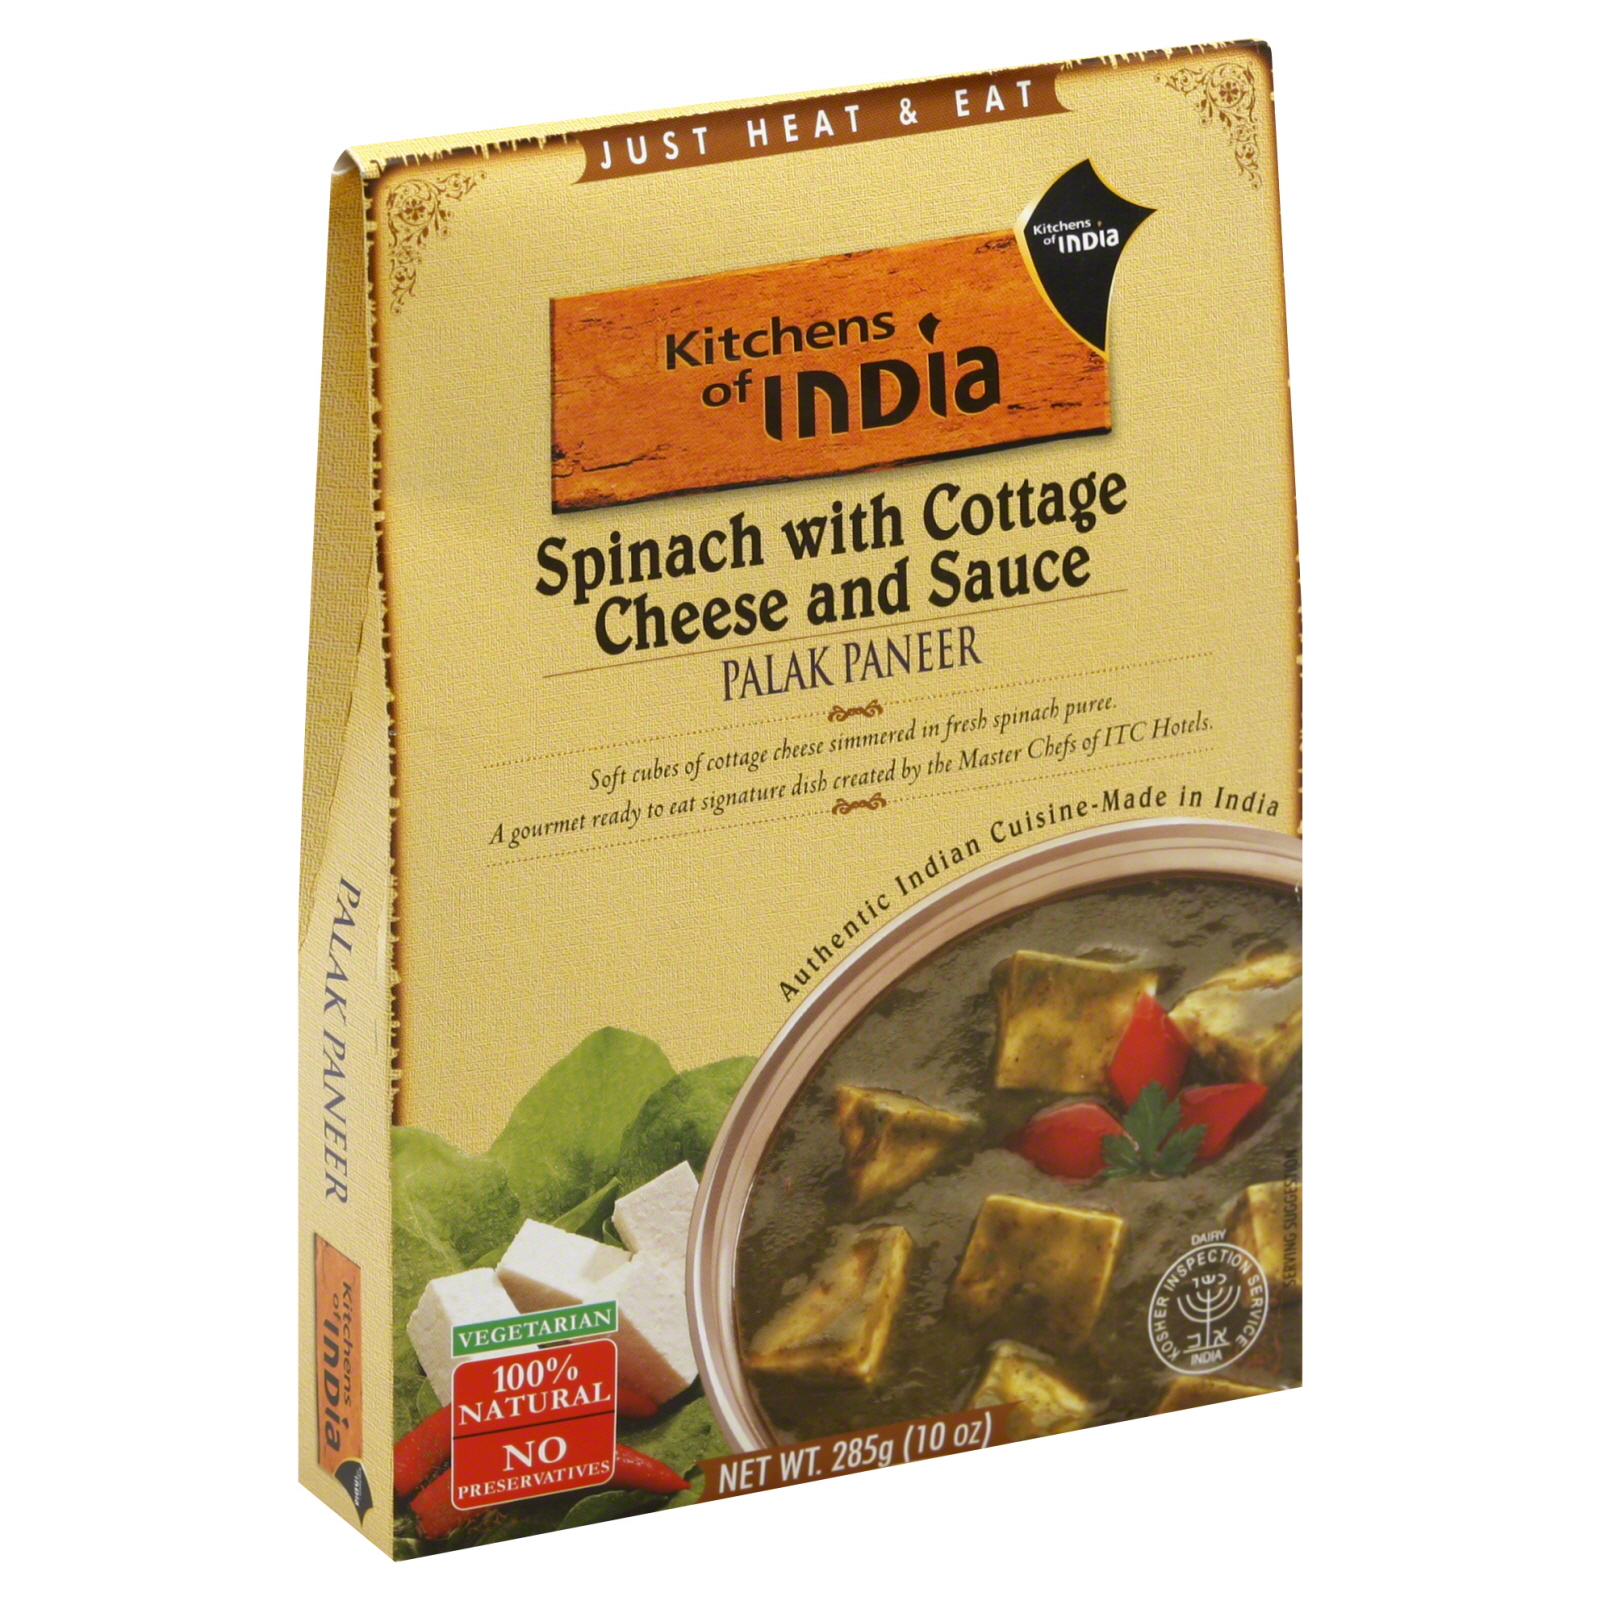 Kitchens of India Spinach with Cottage Cheese and Sauce, Palak Paneer, 10 oz (285 g)